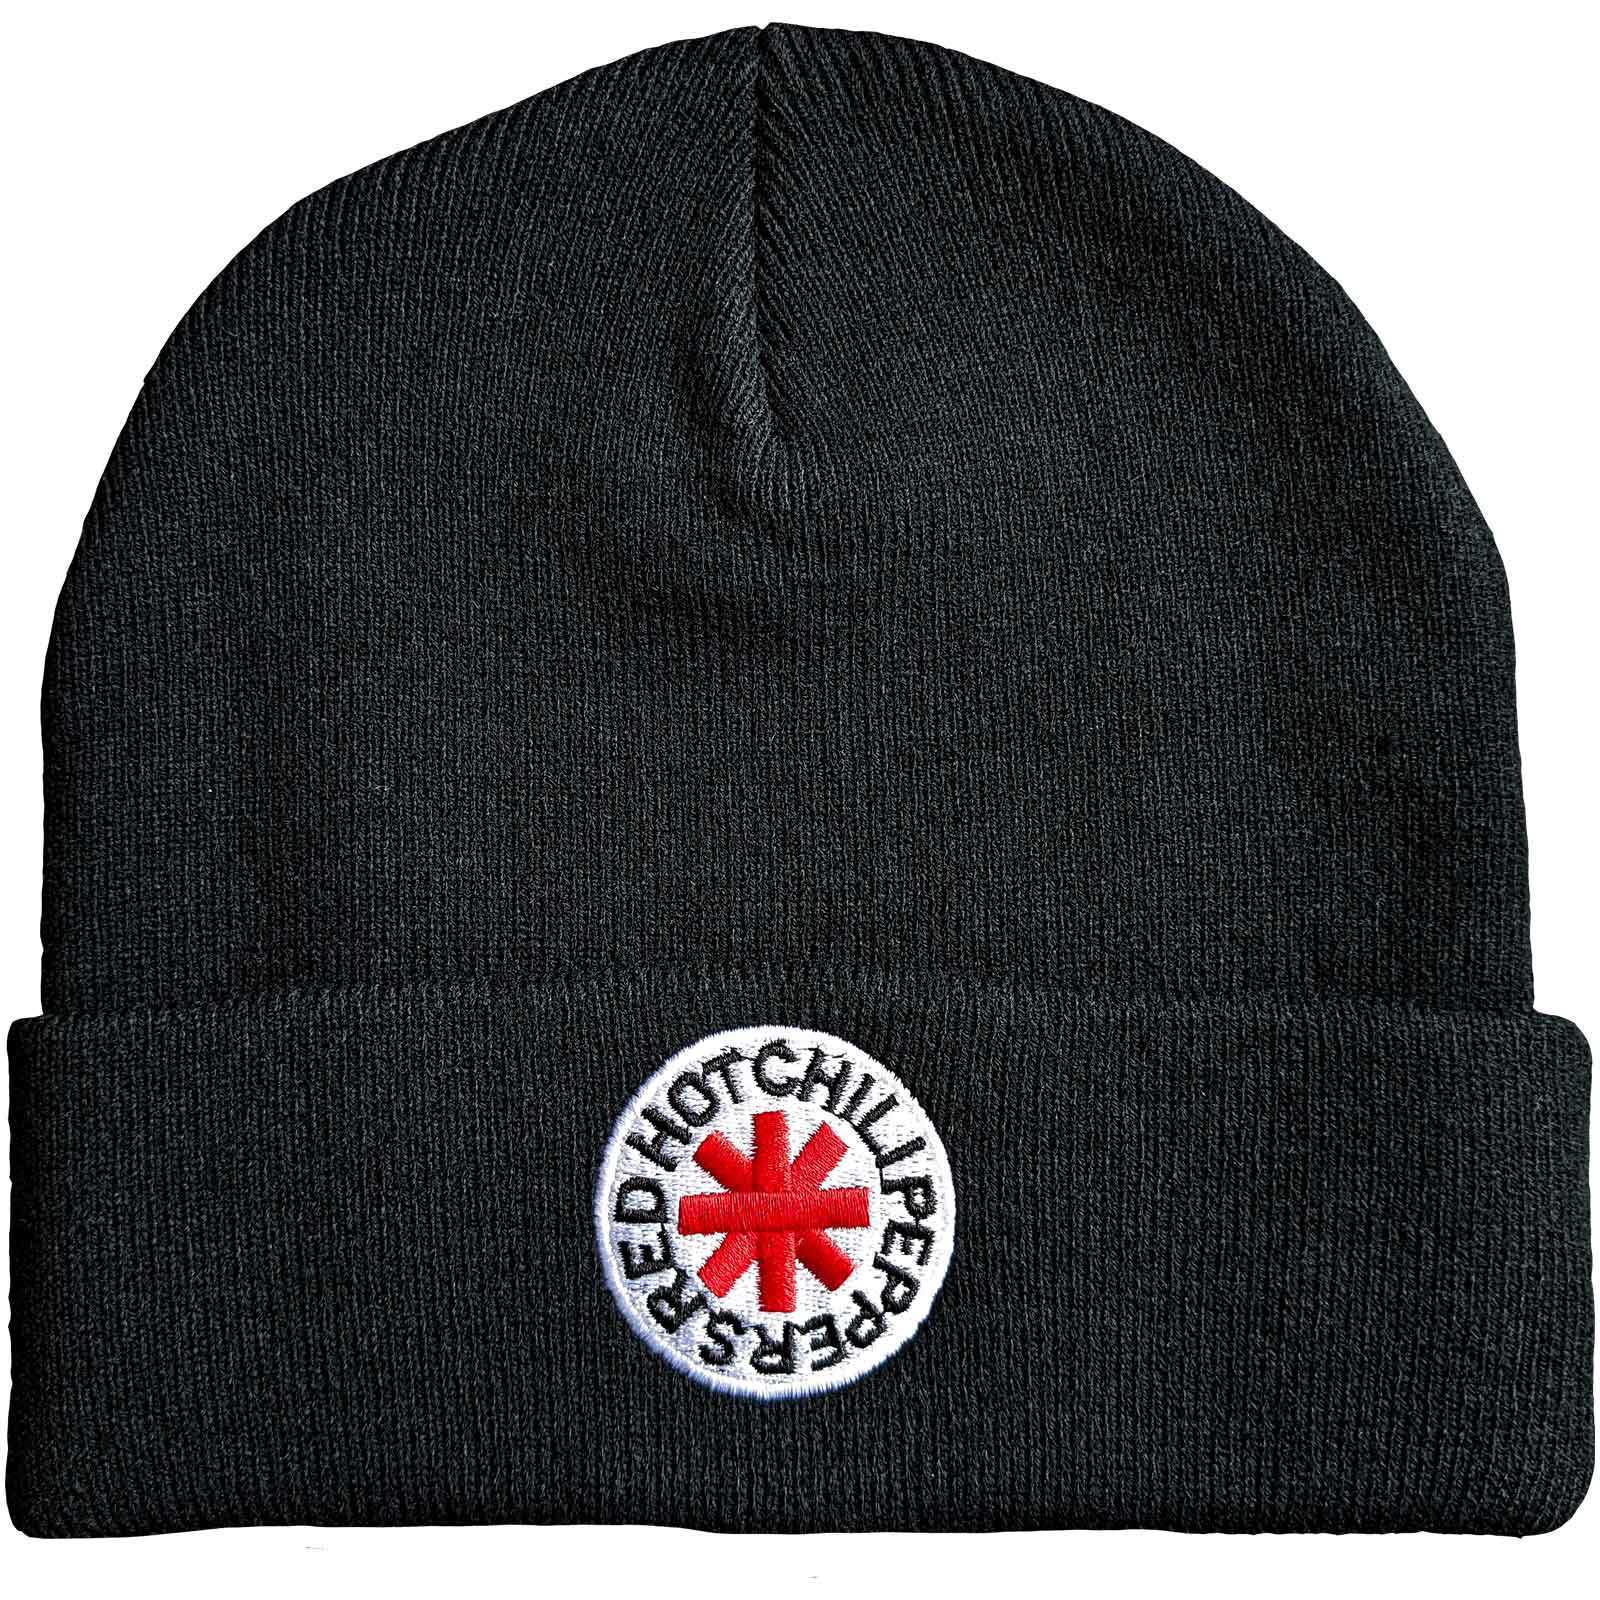 Red Hot Chili Peppers Unisex Beanie Hat